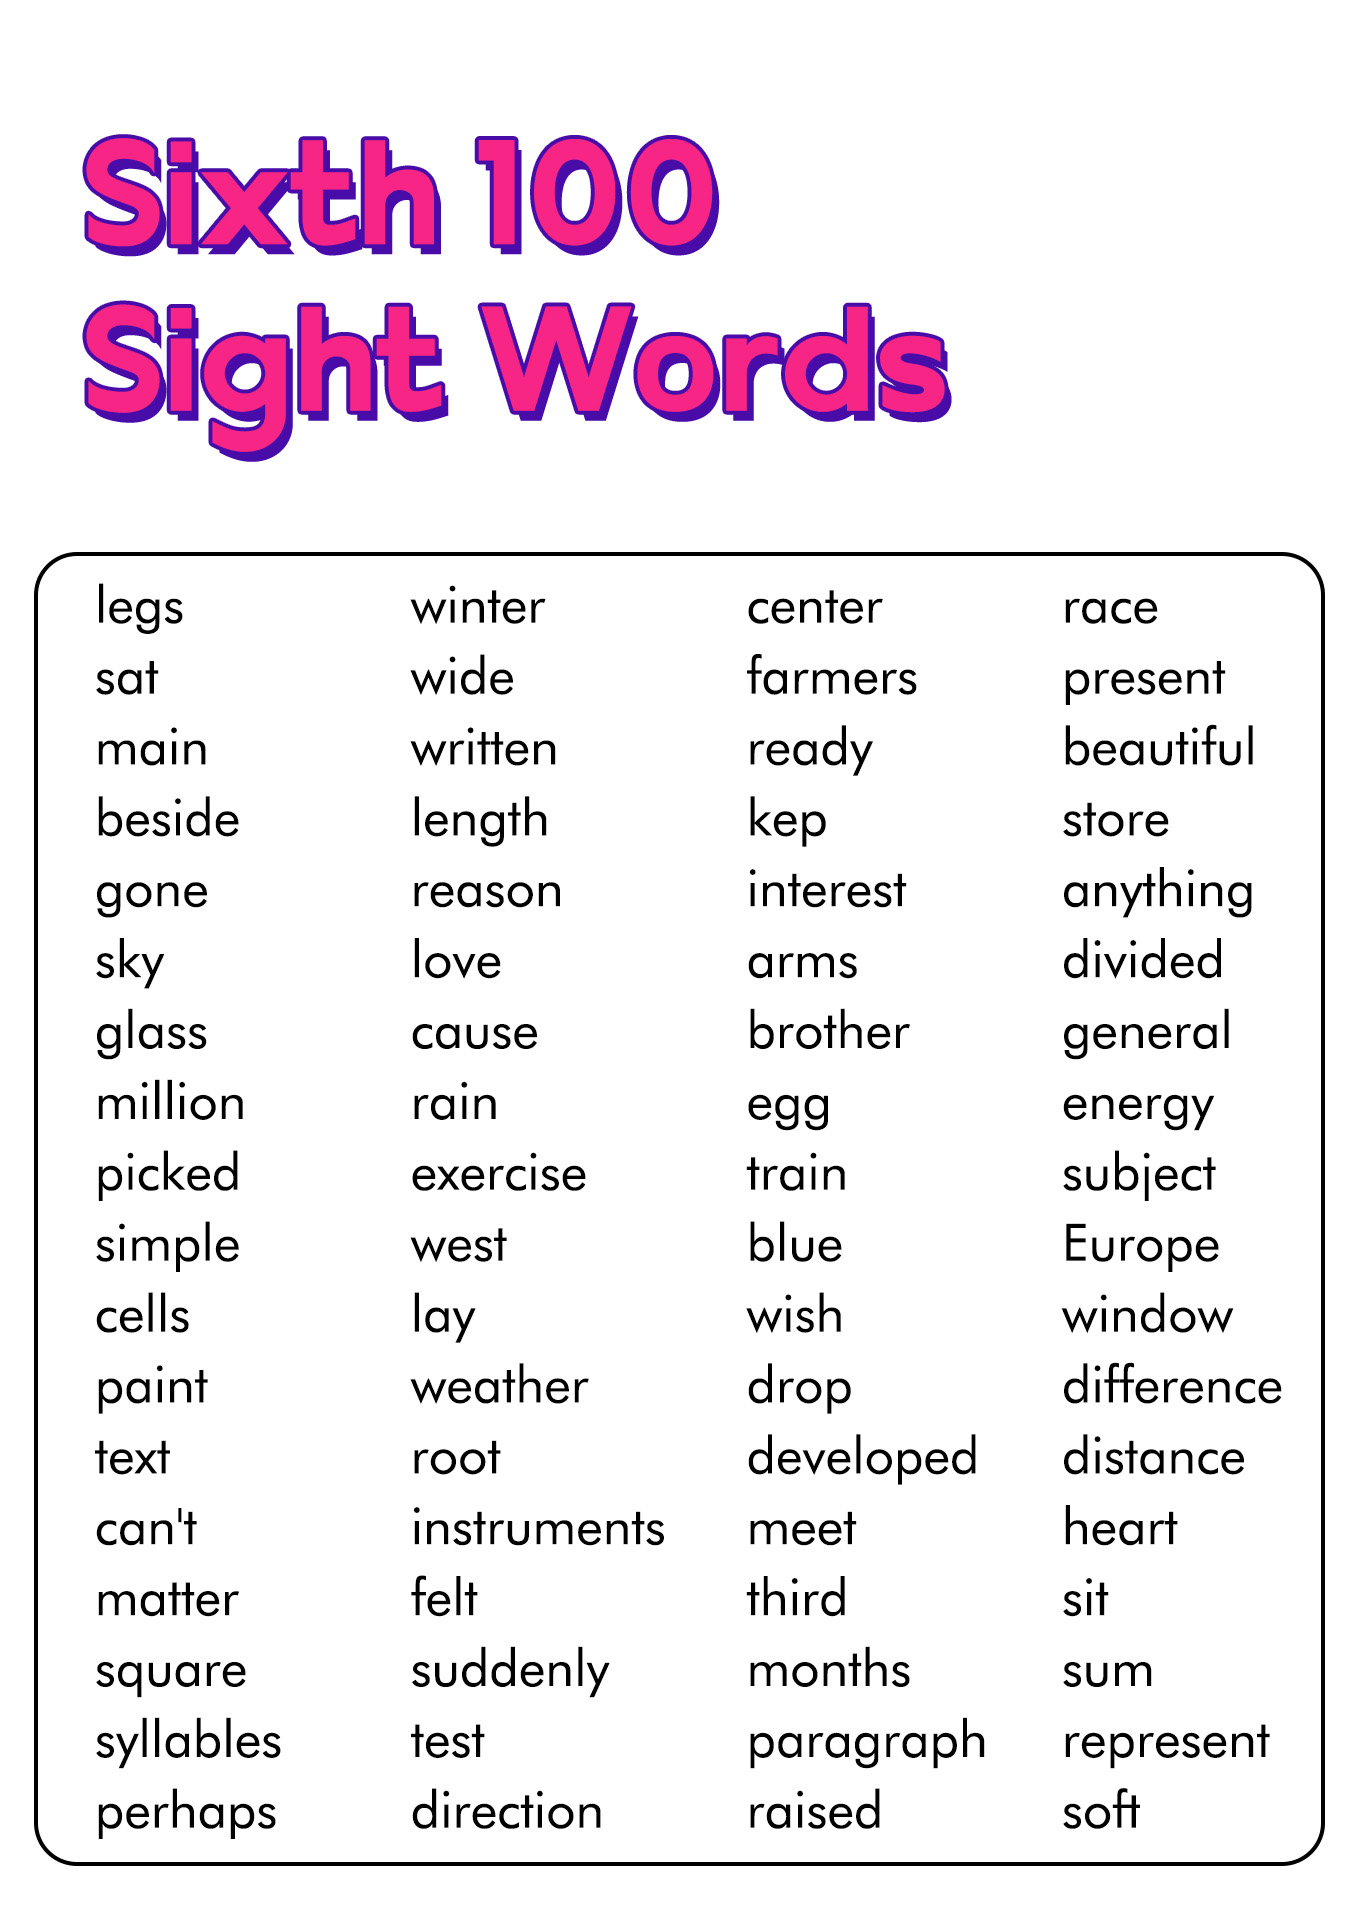 15-best-images-of-6th-grade-spelling-words-worksheets-6th-grade-spelling-word-lists-6th-grade